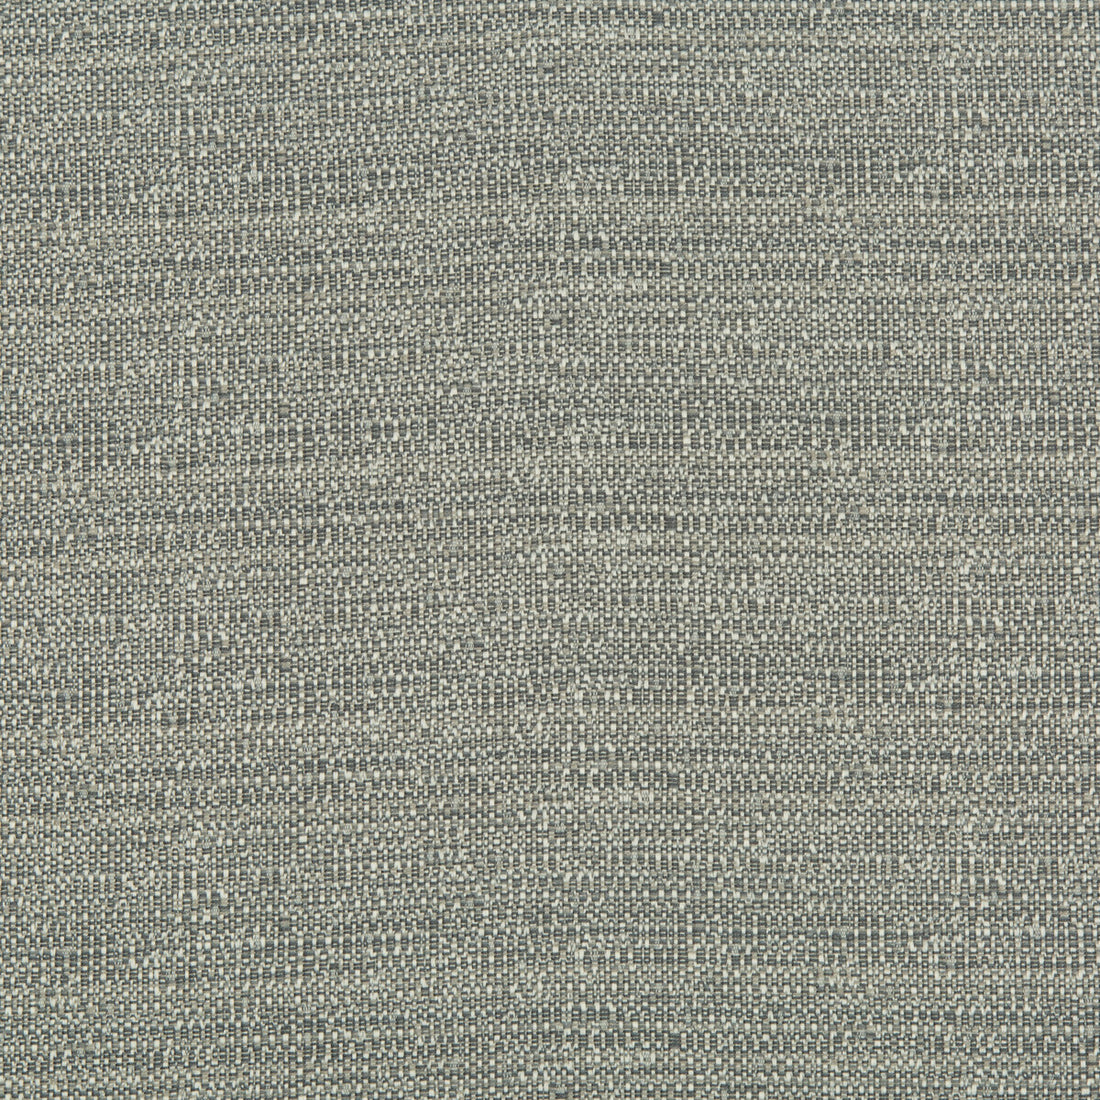 Kravet Contract fabric in 35141-11 color - pattern 35141.11.0 - by Kravet Contract in the Incase Crypton Gis collection